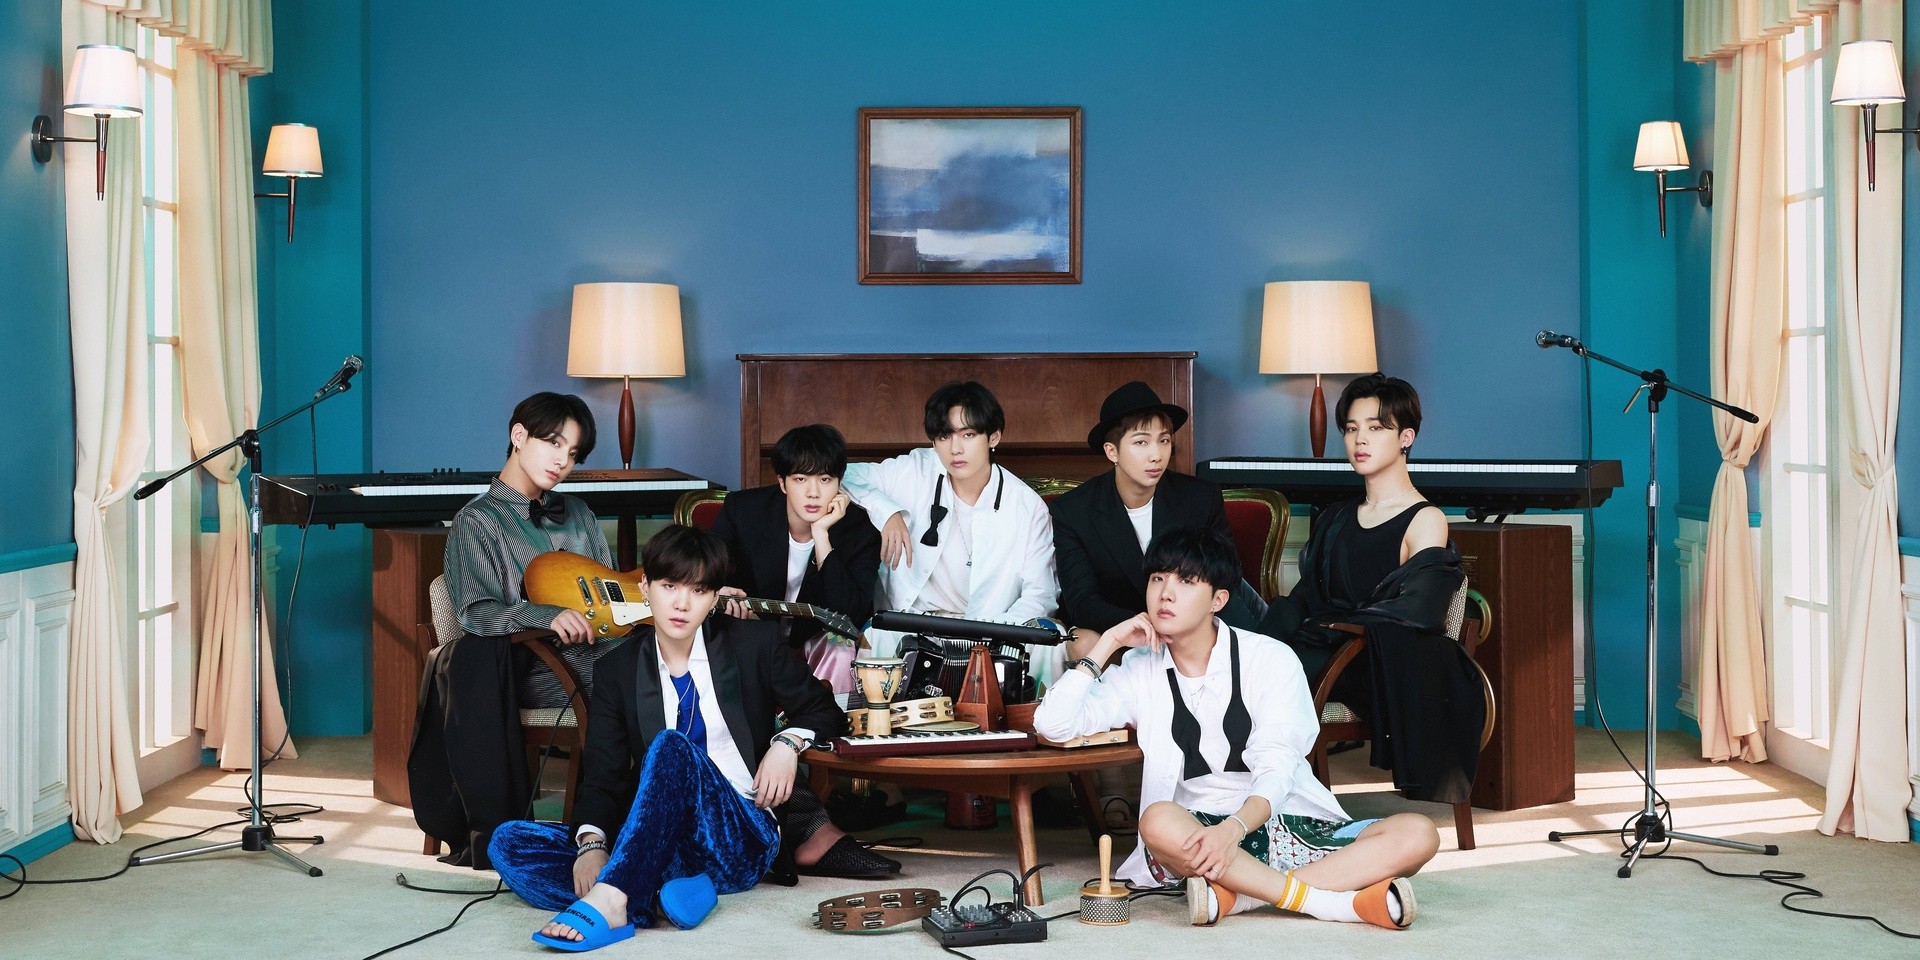 Like an old friend, BTS' BE brings comfort in the simplest way: through music and encouraging words – album review